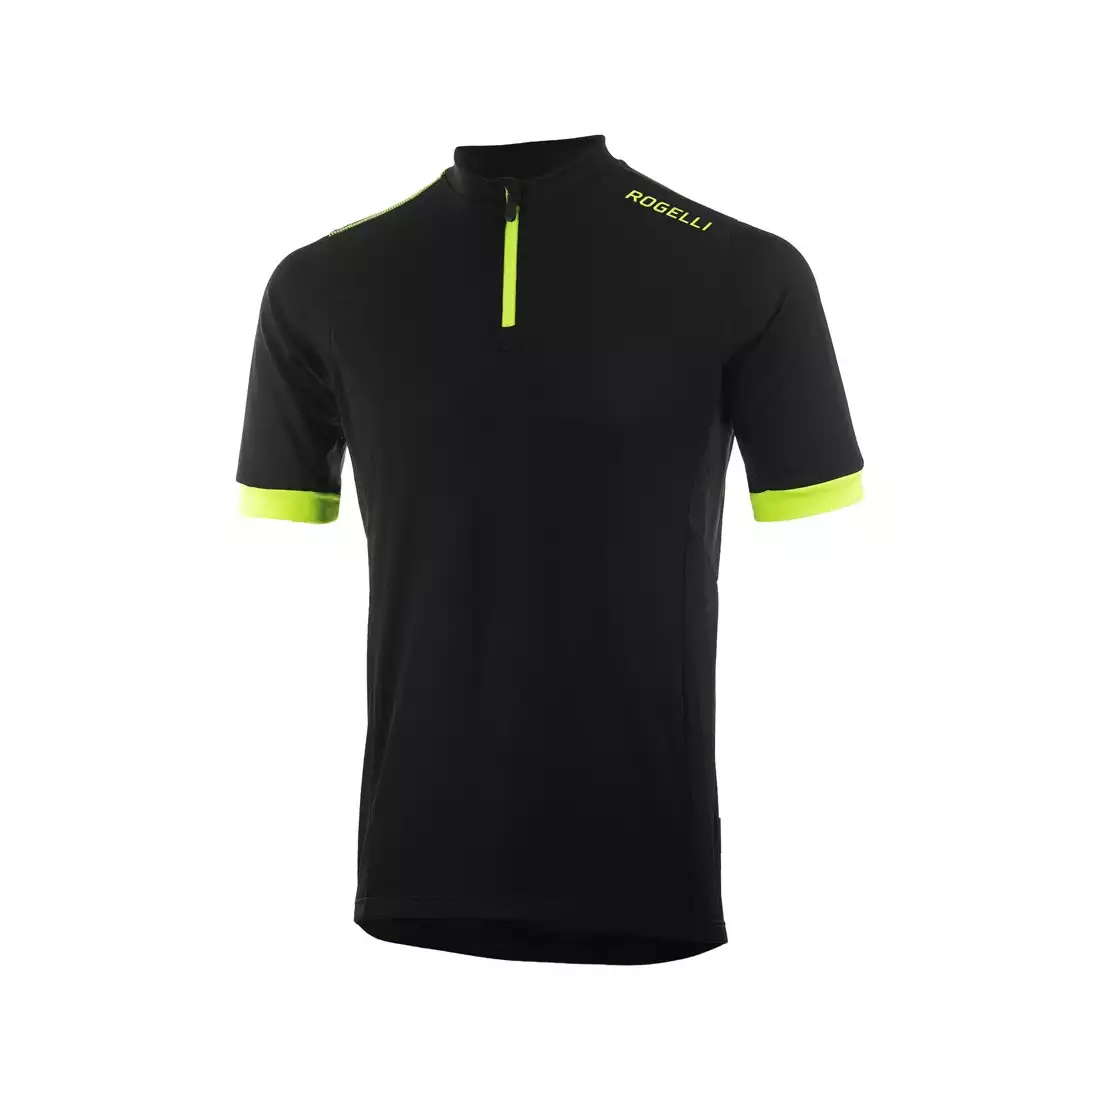 ROGELLI CORE children's cycling jersey, black and yellow